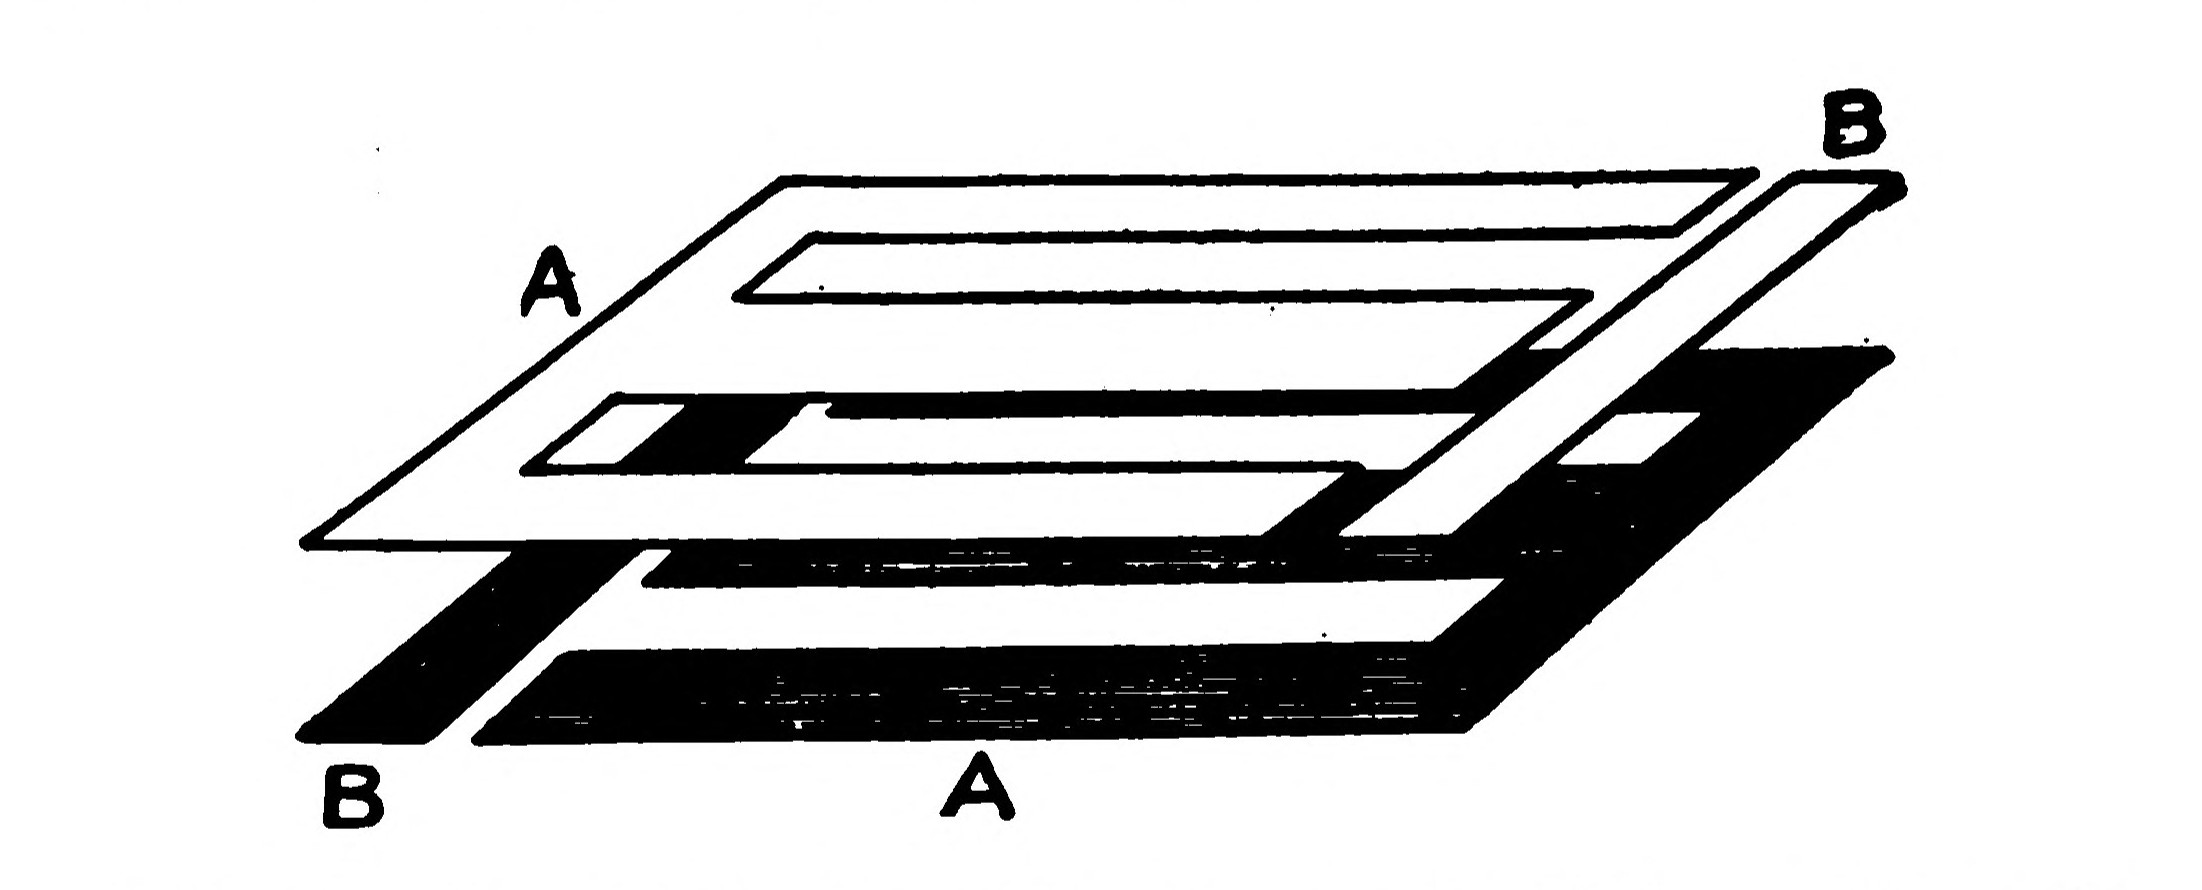 FIG. 59.—The Method used in piling up the Strips to Assemble the Core.